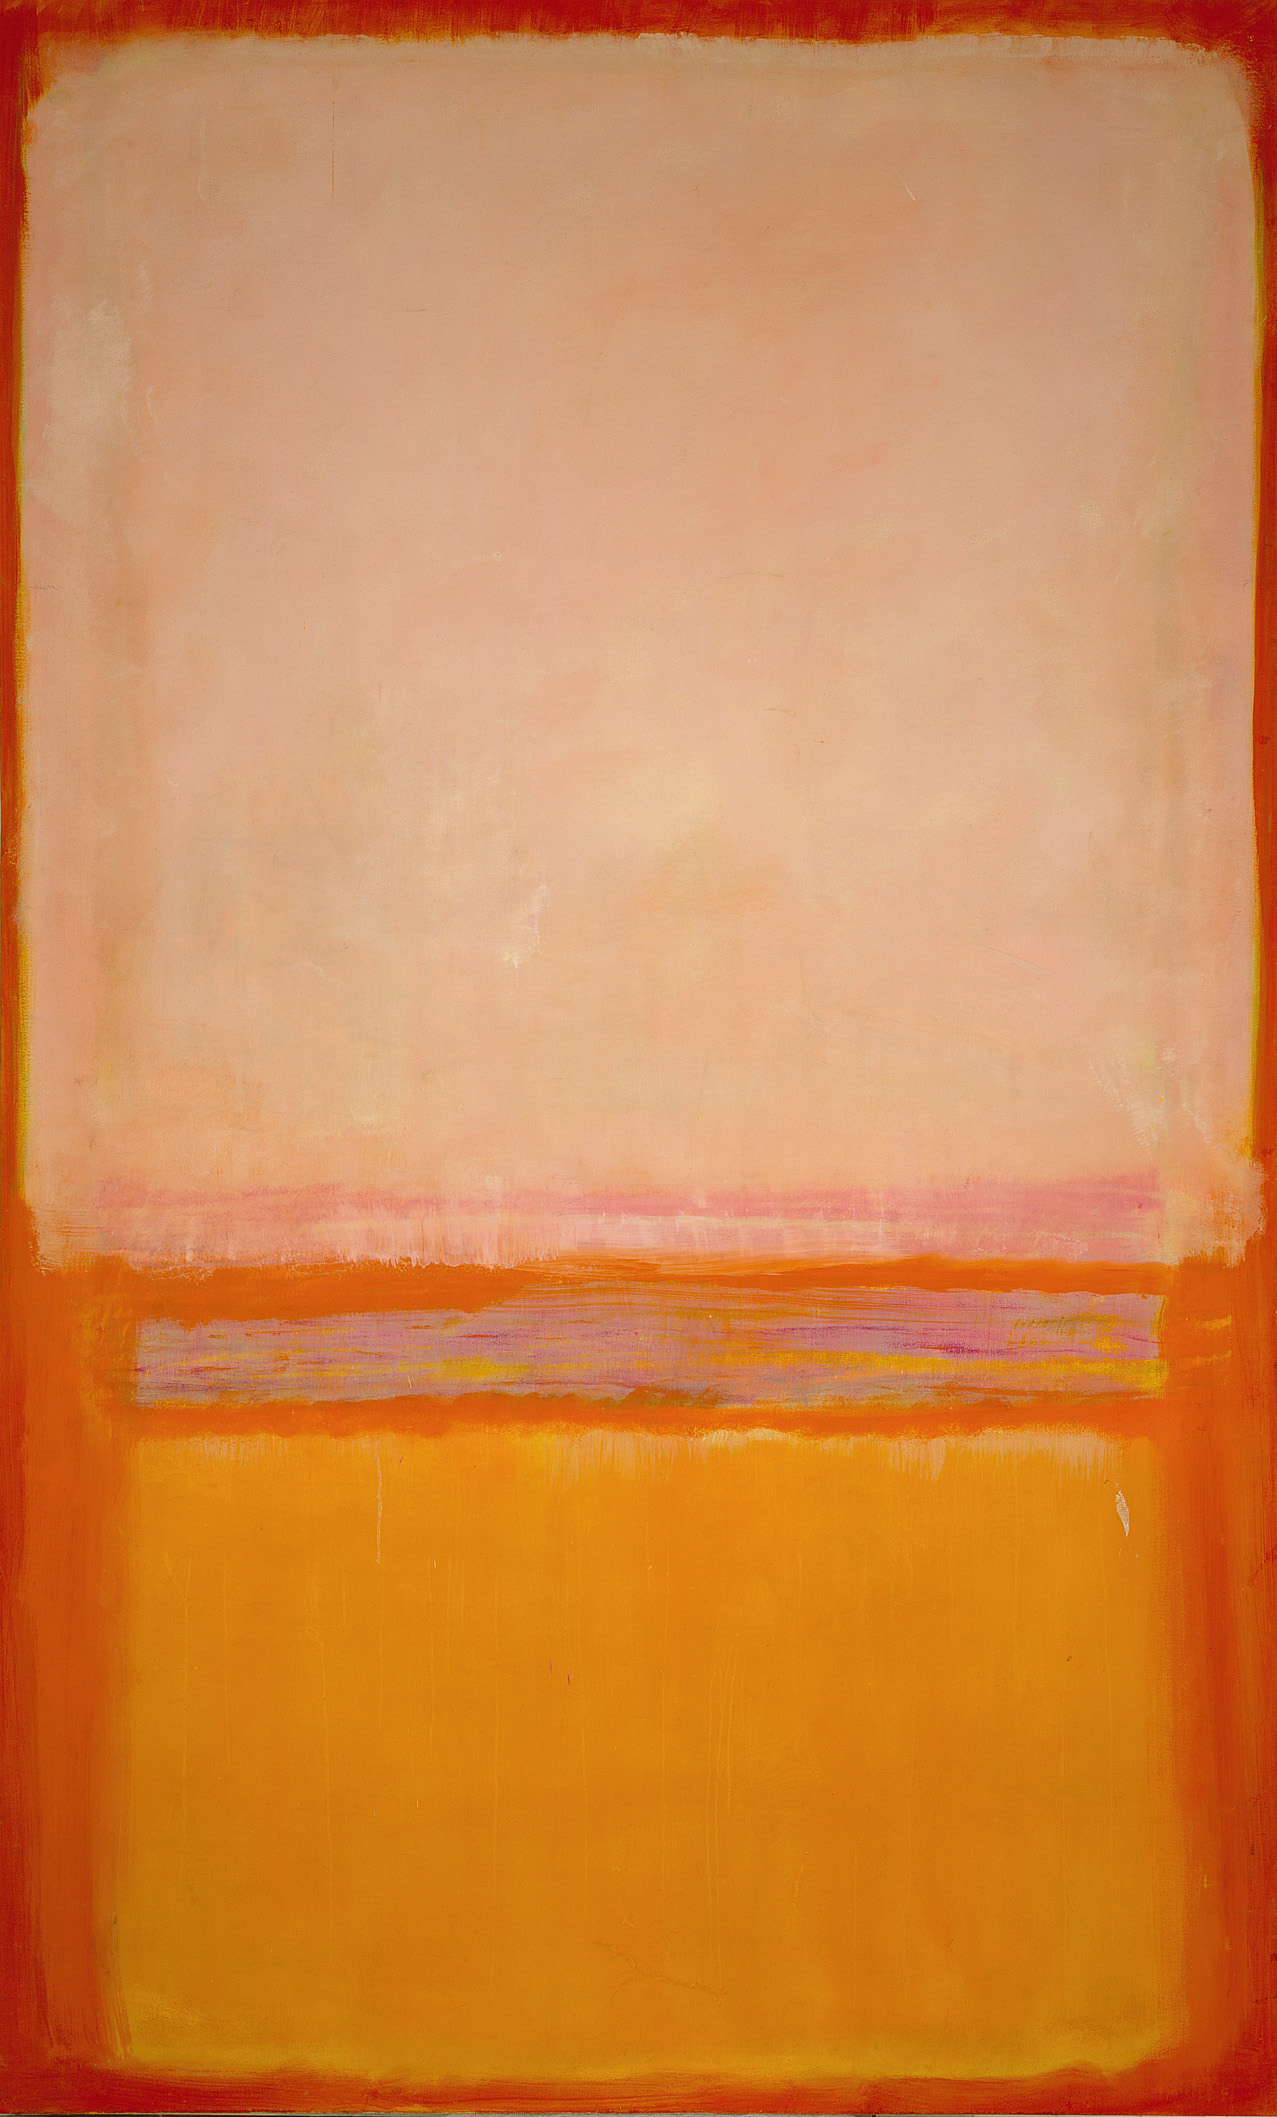 Senza titolo by Mark Rothko - 1950 - 230.2 × 128.9 cm Kunsthistorisches Museum